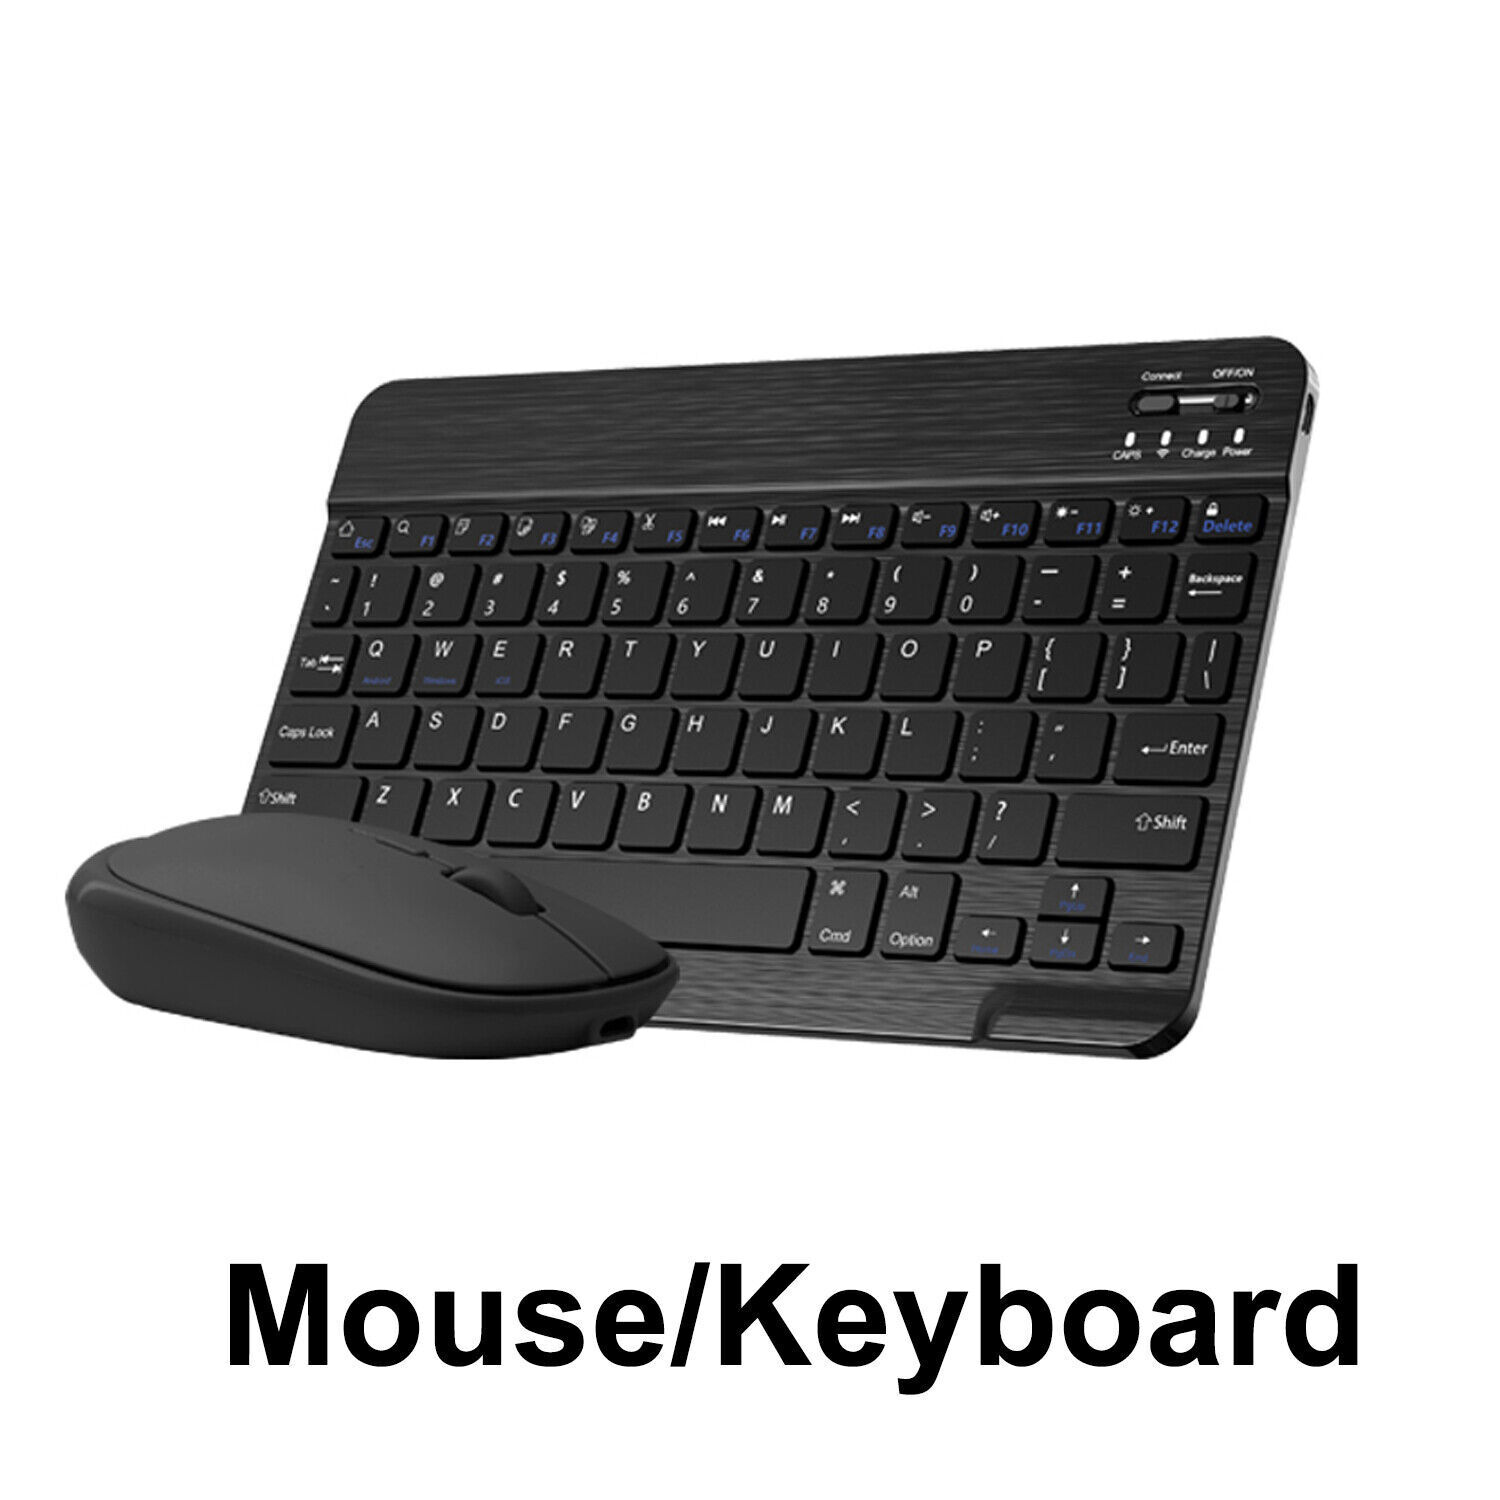 Wireless Bluetooth Keyboard and Mouse Waterproof For Apple iPad Mac PC Computer